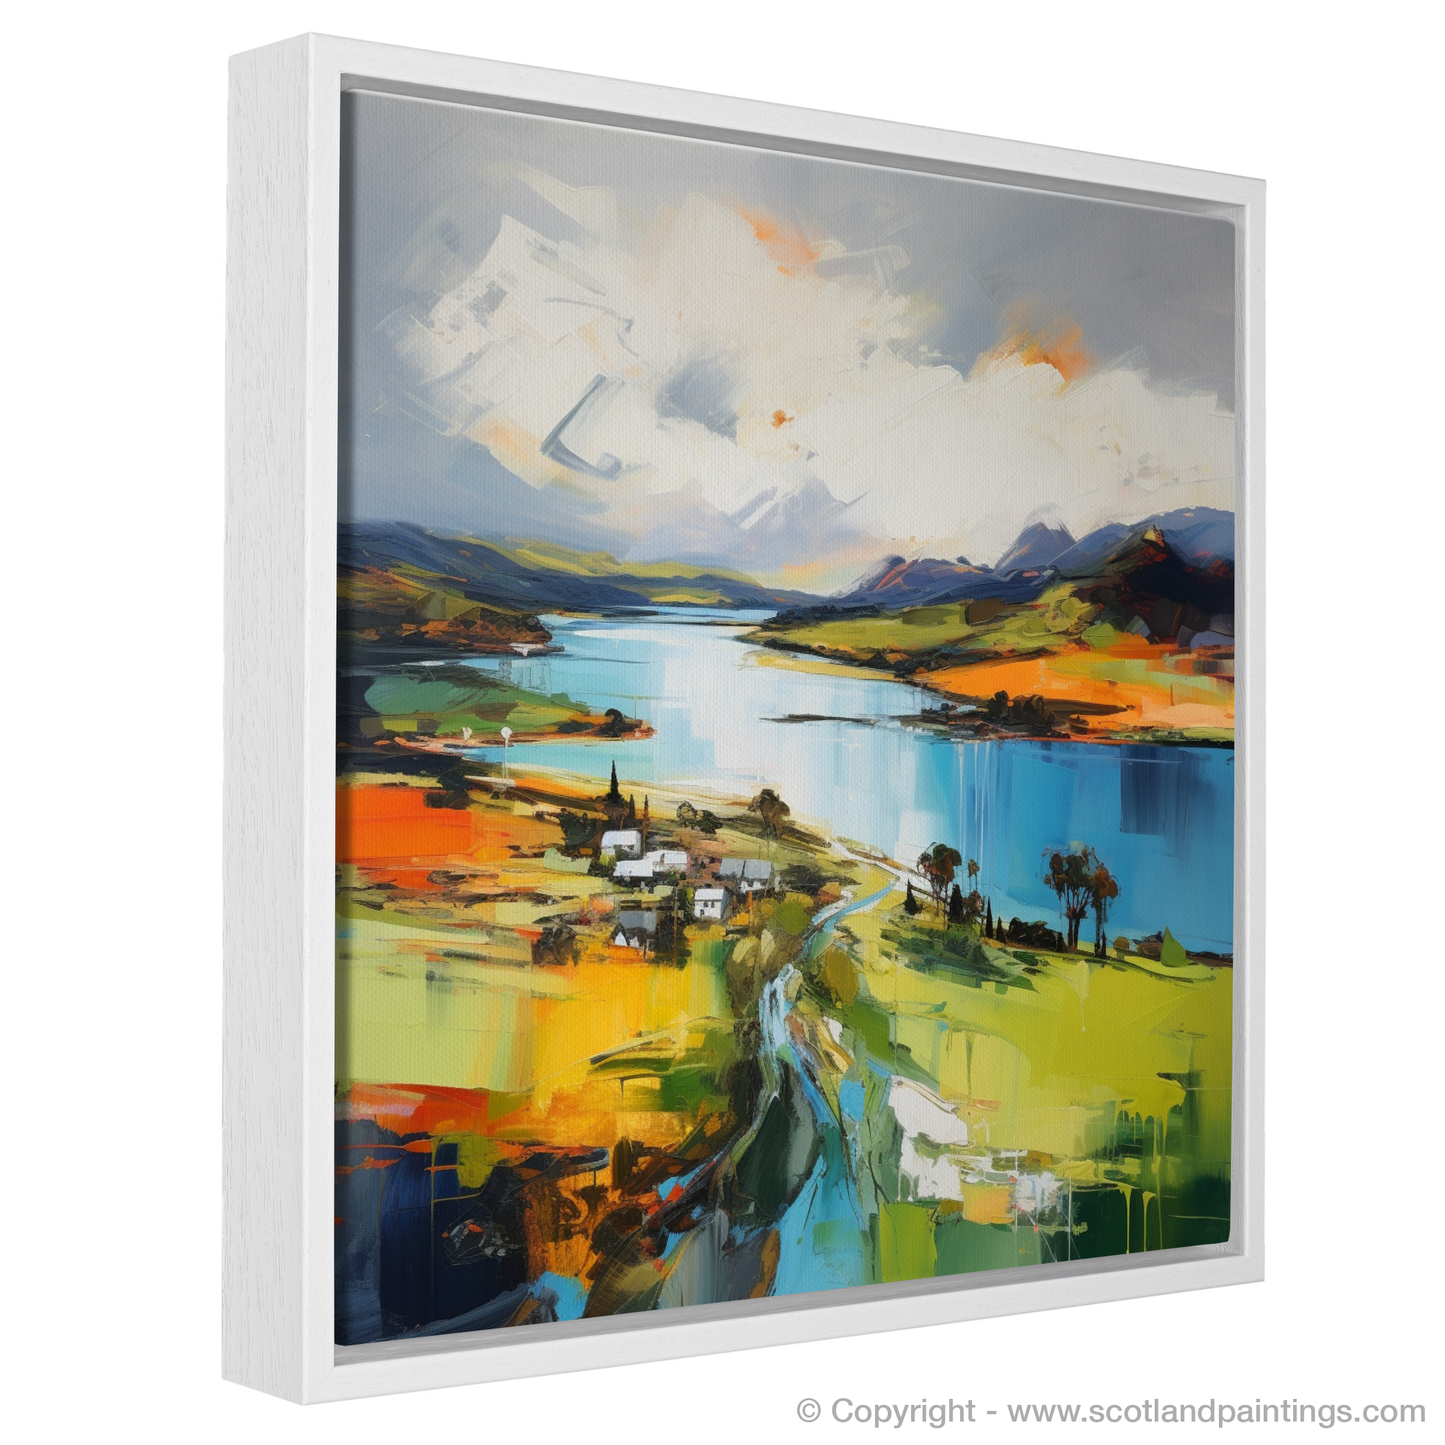 Painting and Art Print of Loch Leven, Perth and Kinross entitled "Loch Leven Rhapsody in Expressionist Hues".